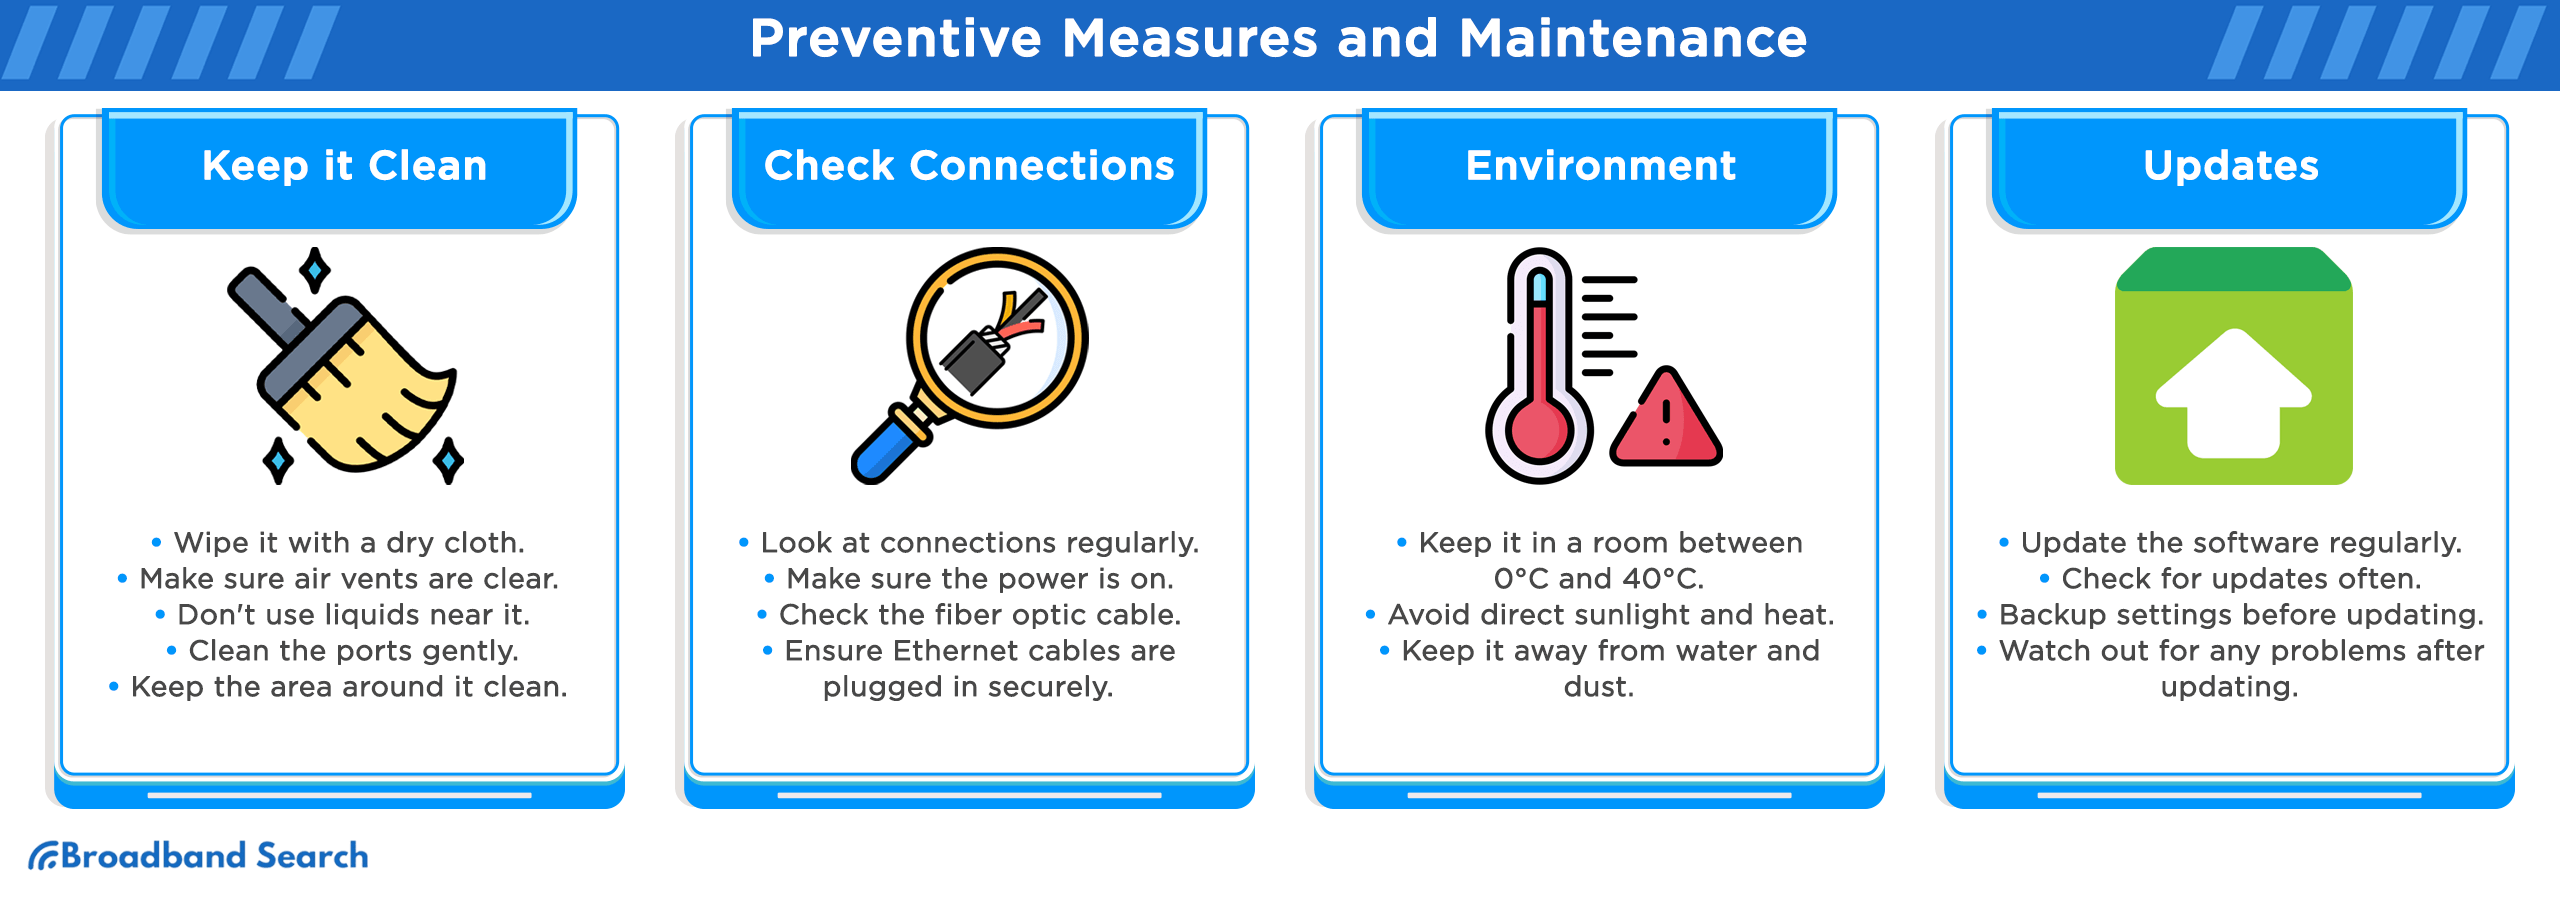 Preventive measures and maintenance